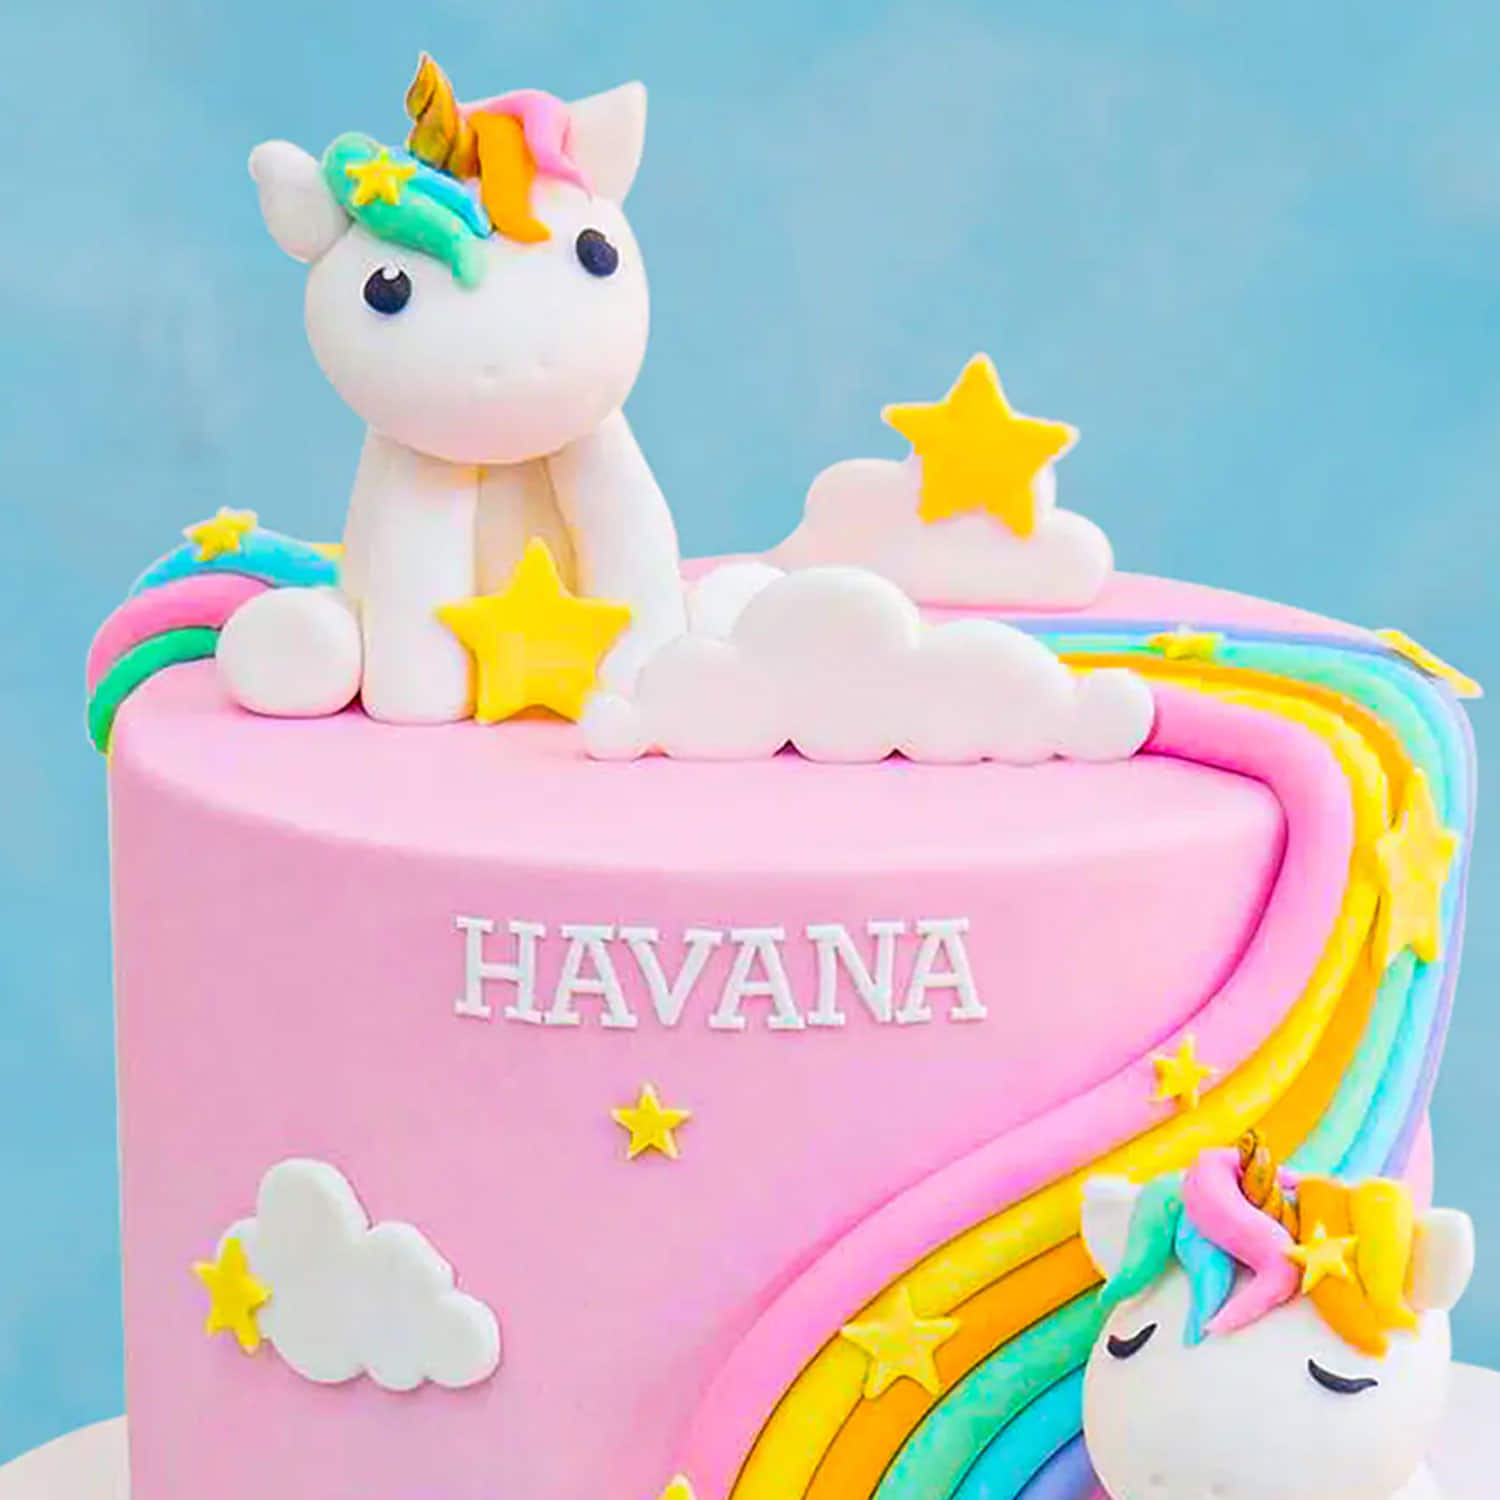 How To Make a Unicorn Cake with Rainbow Layers - Family Spice